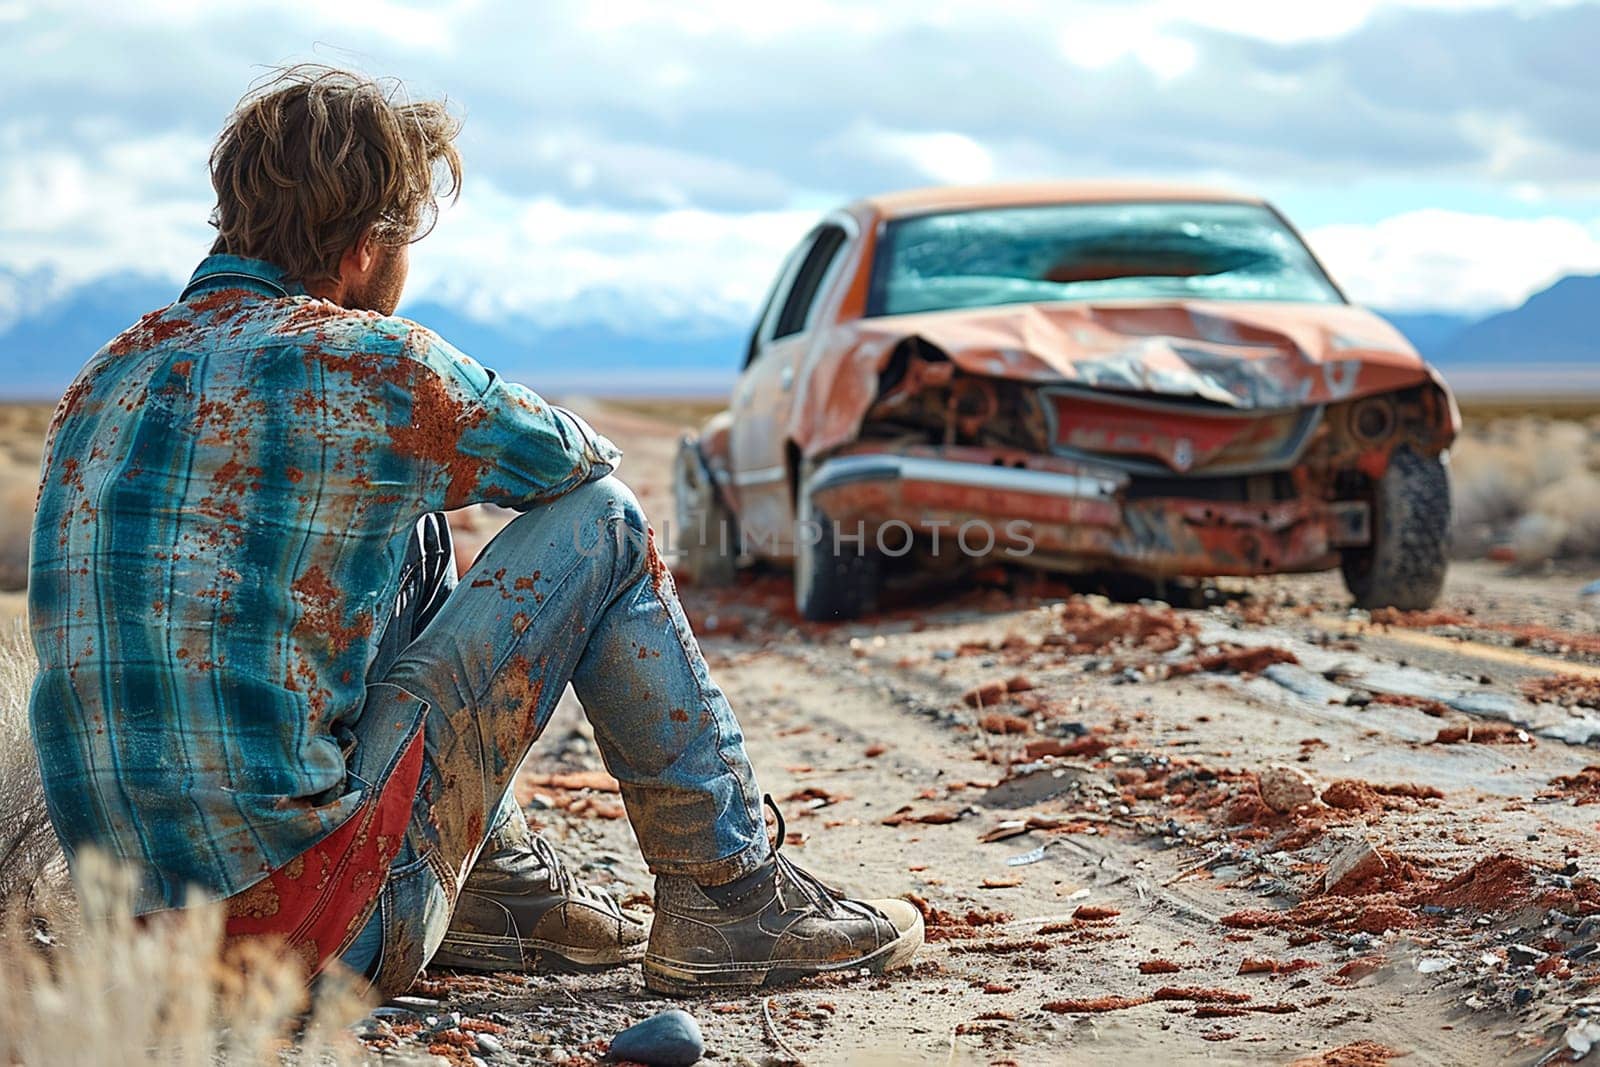 Man sitting wrecked car desert road, accident aftermath. Male lost dusty landscape, vehicle damage by Yevhen89